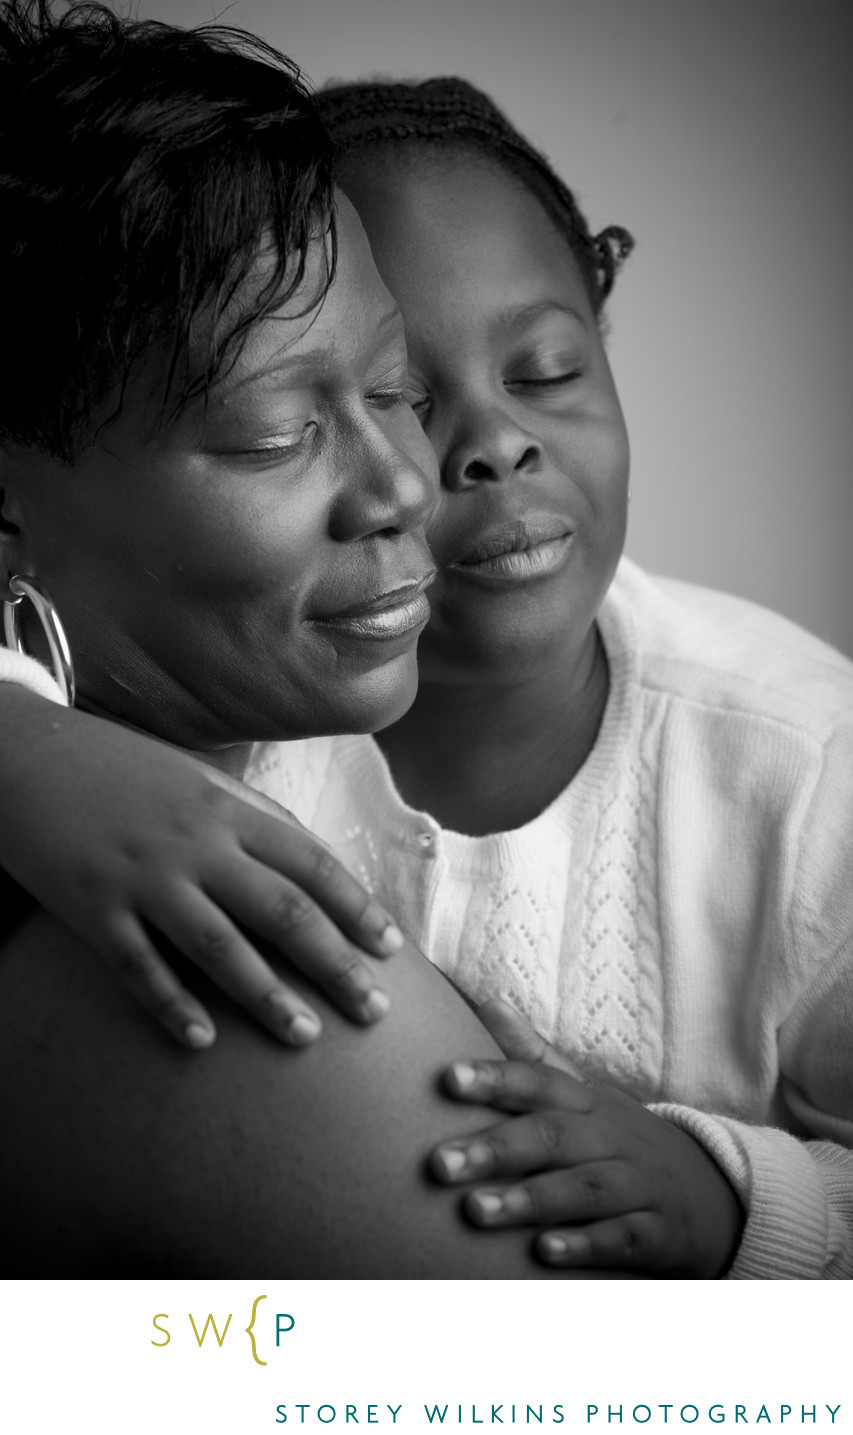 Toronto Mother and Daughter Portrait:  Cherished Bond